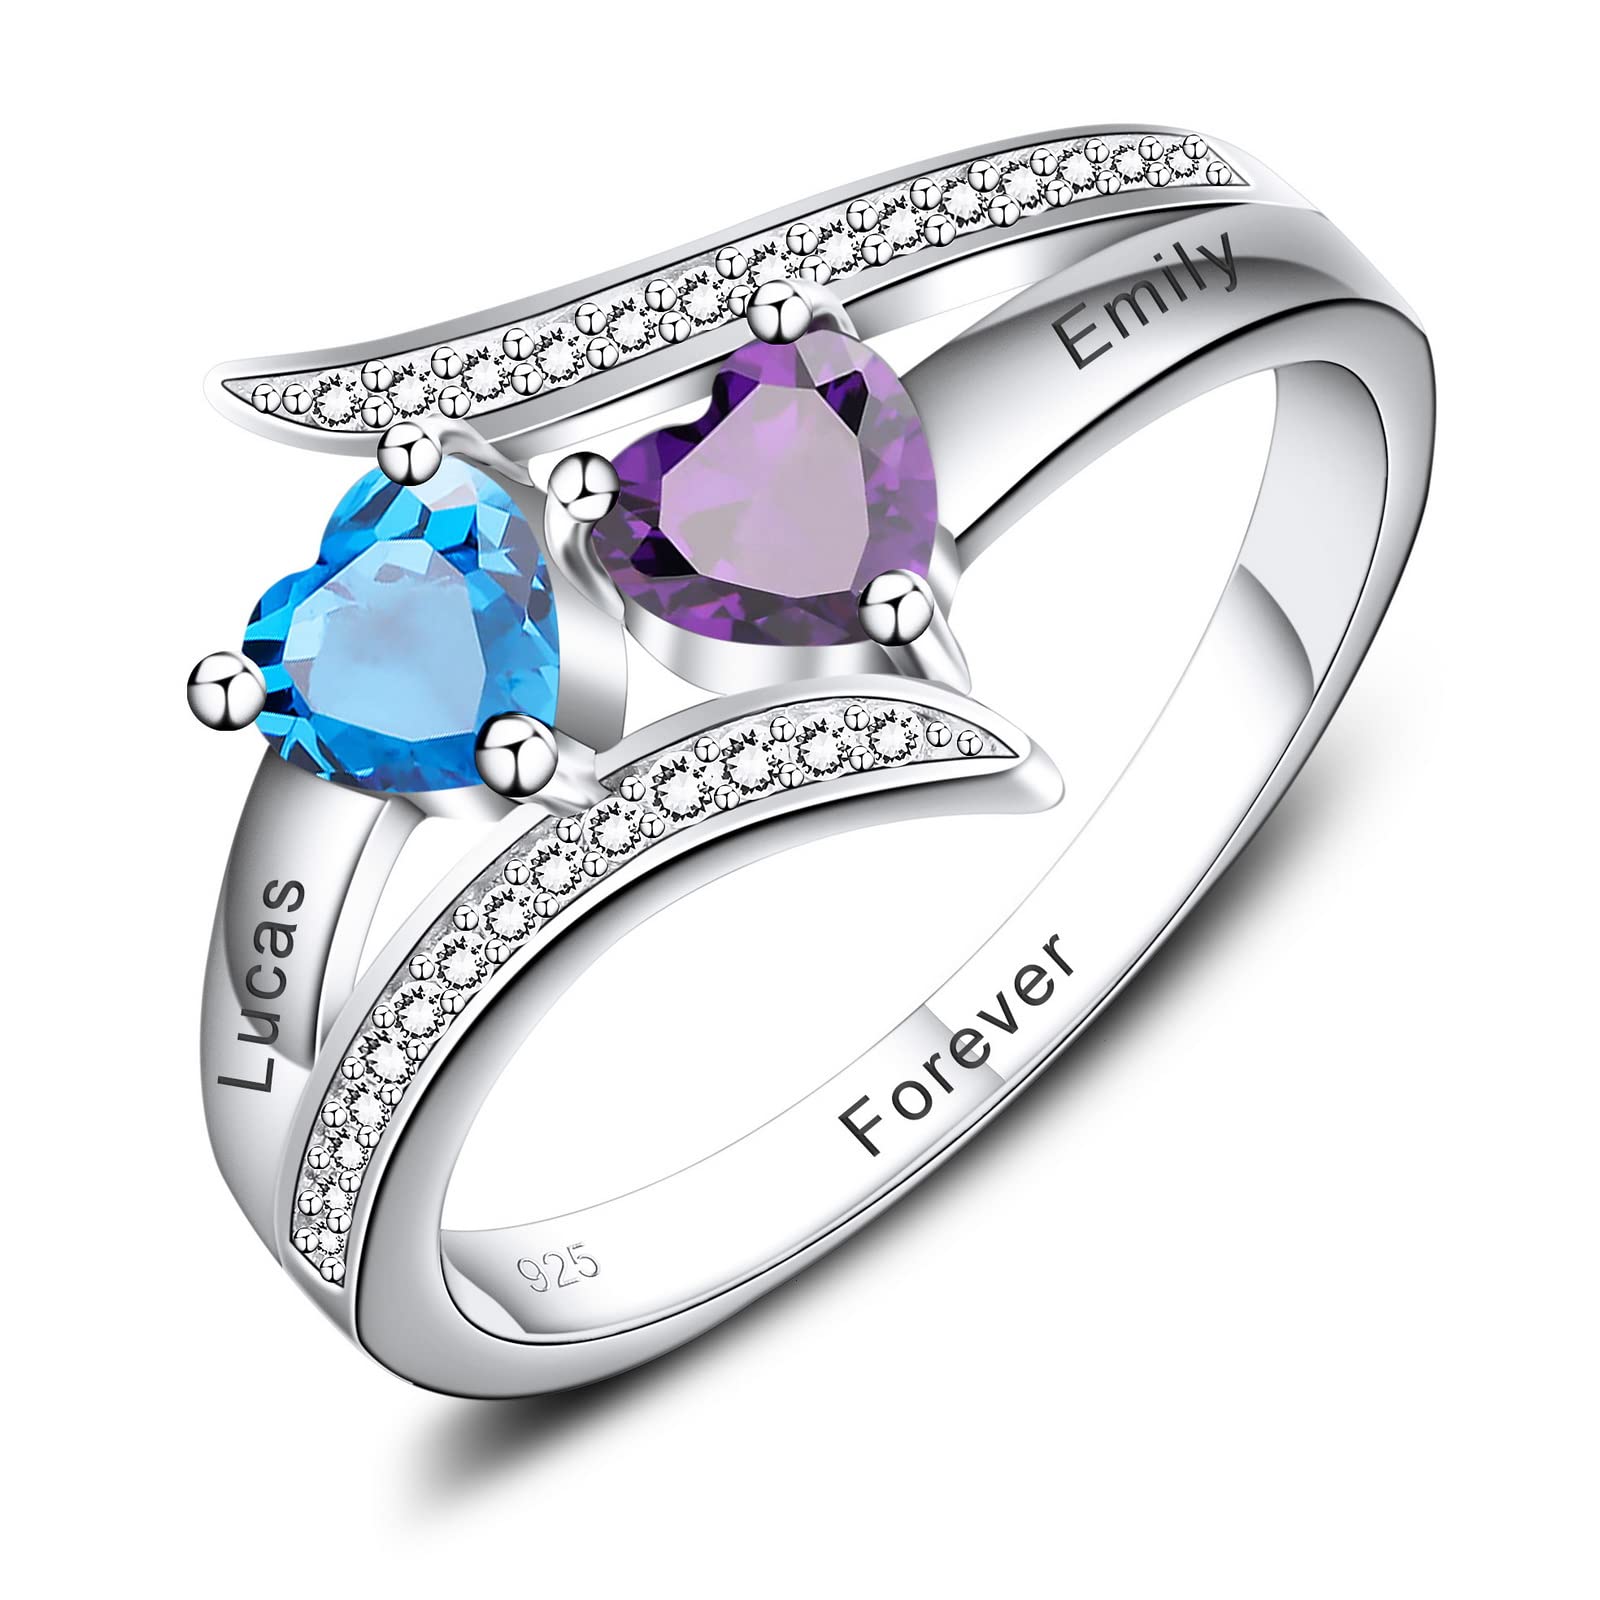 INBLUE Personalized Mom Rings with Birthstones & Names, Engravable Mom Ring/Family Birthstone Ring/Grandmother's Ring with Birthstones, S925 Sterling Silver Gift for Mother's Day from Daughter